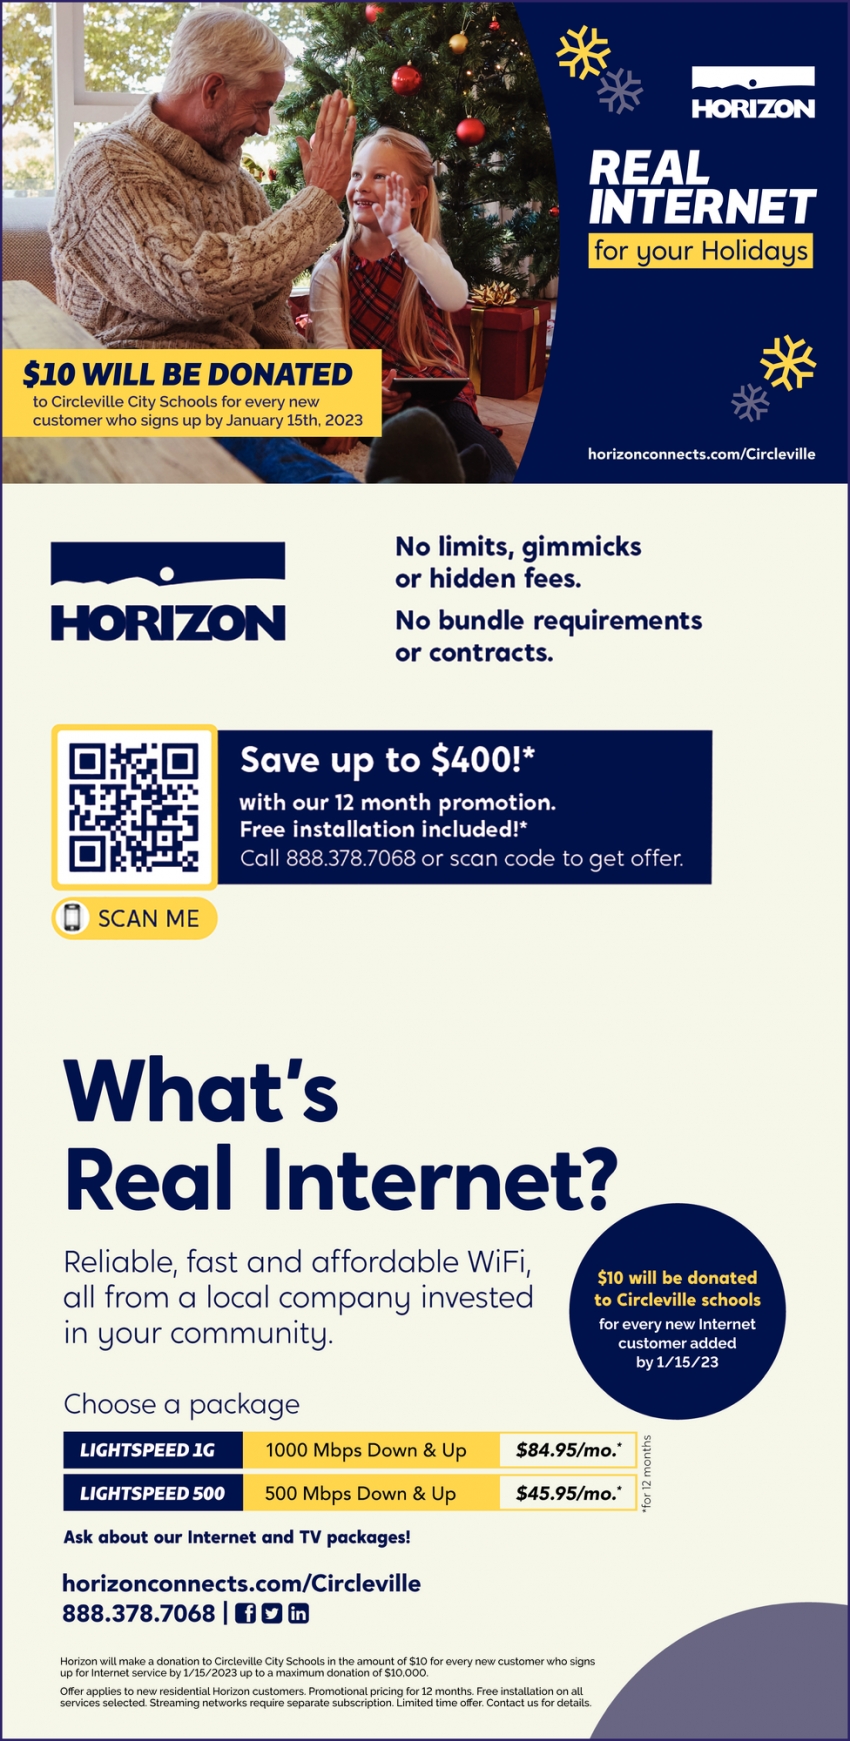 Real Internet For Your Holidays